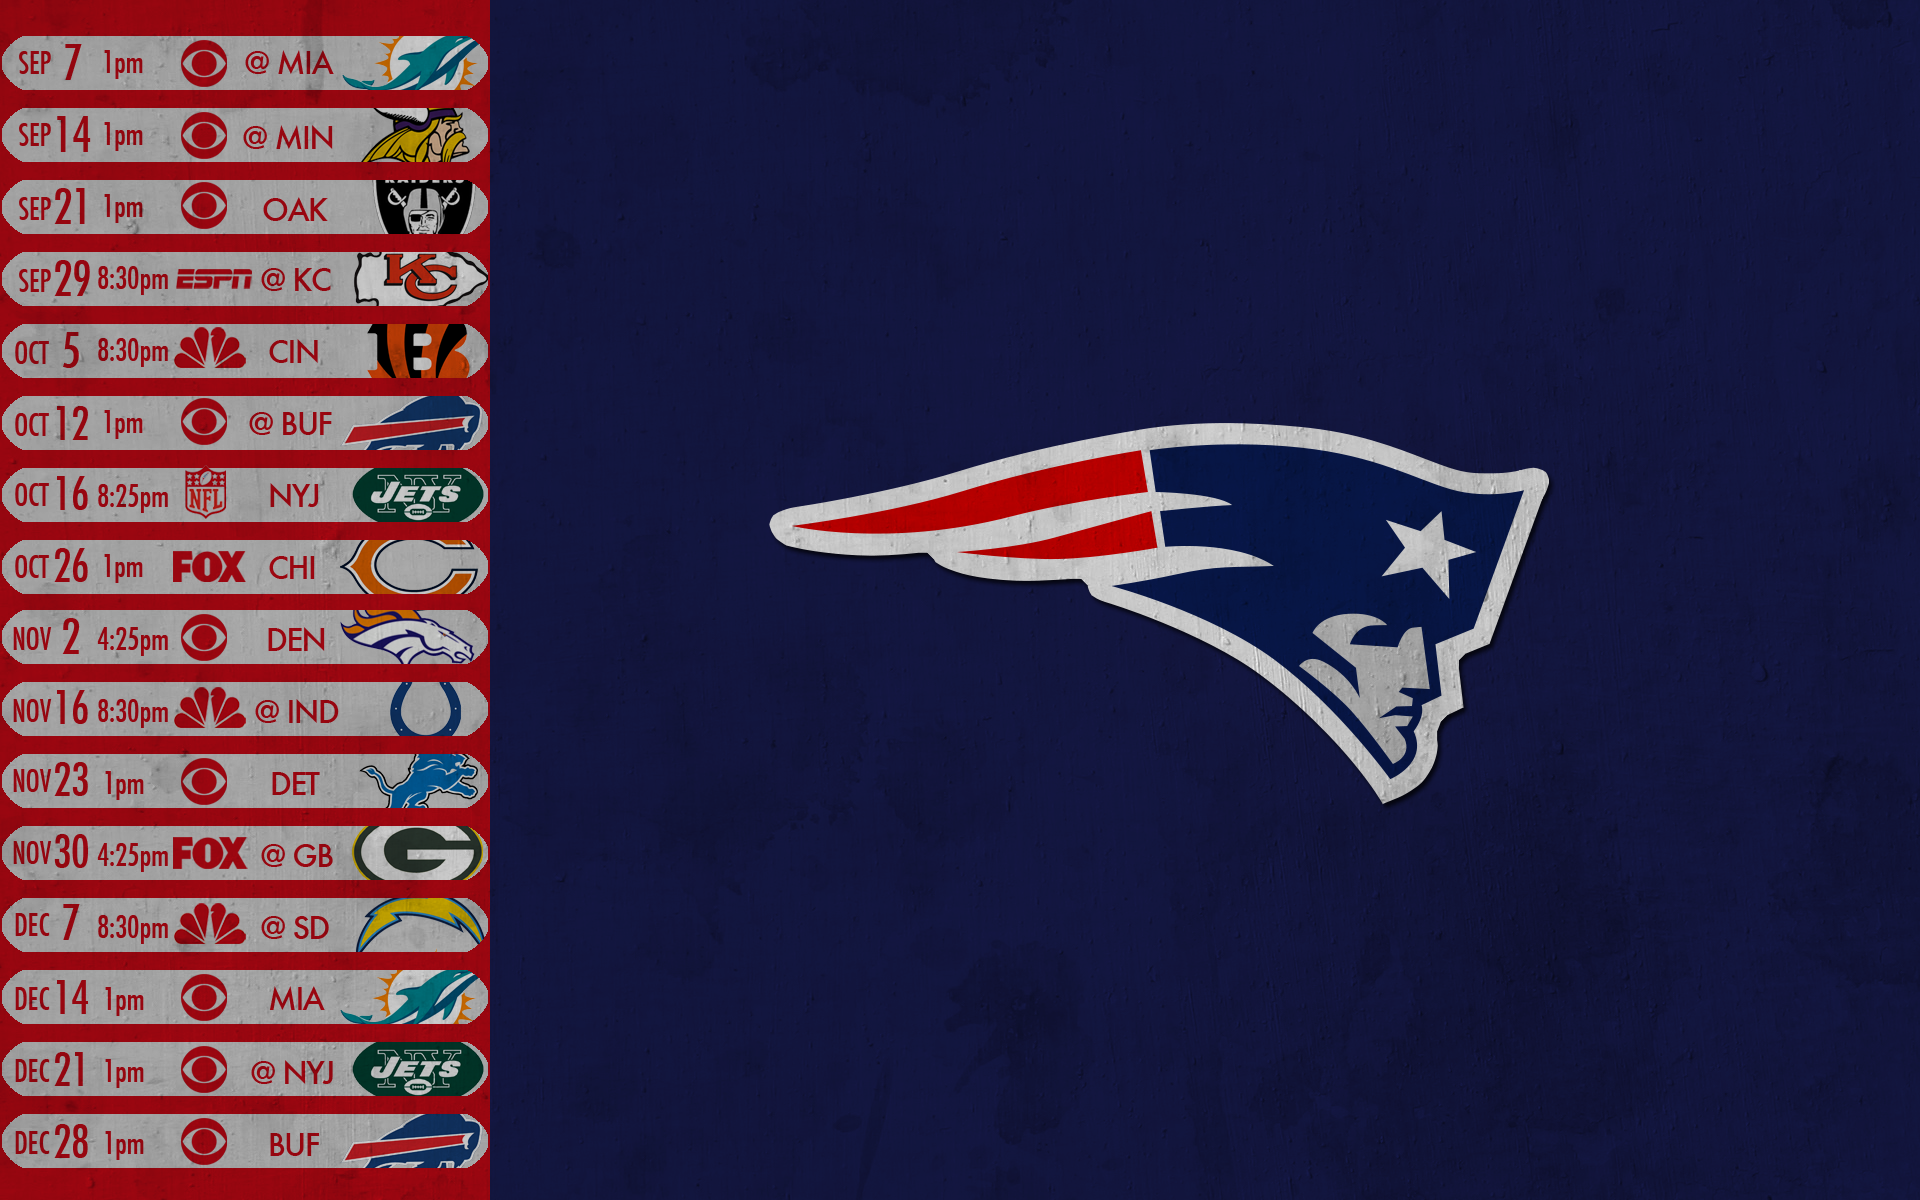 Anyone interested in some 2014 schedule wallpapers Patriots